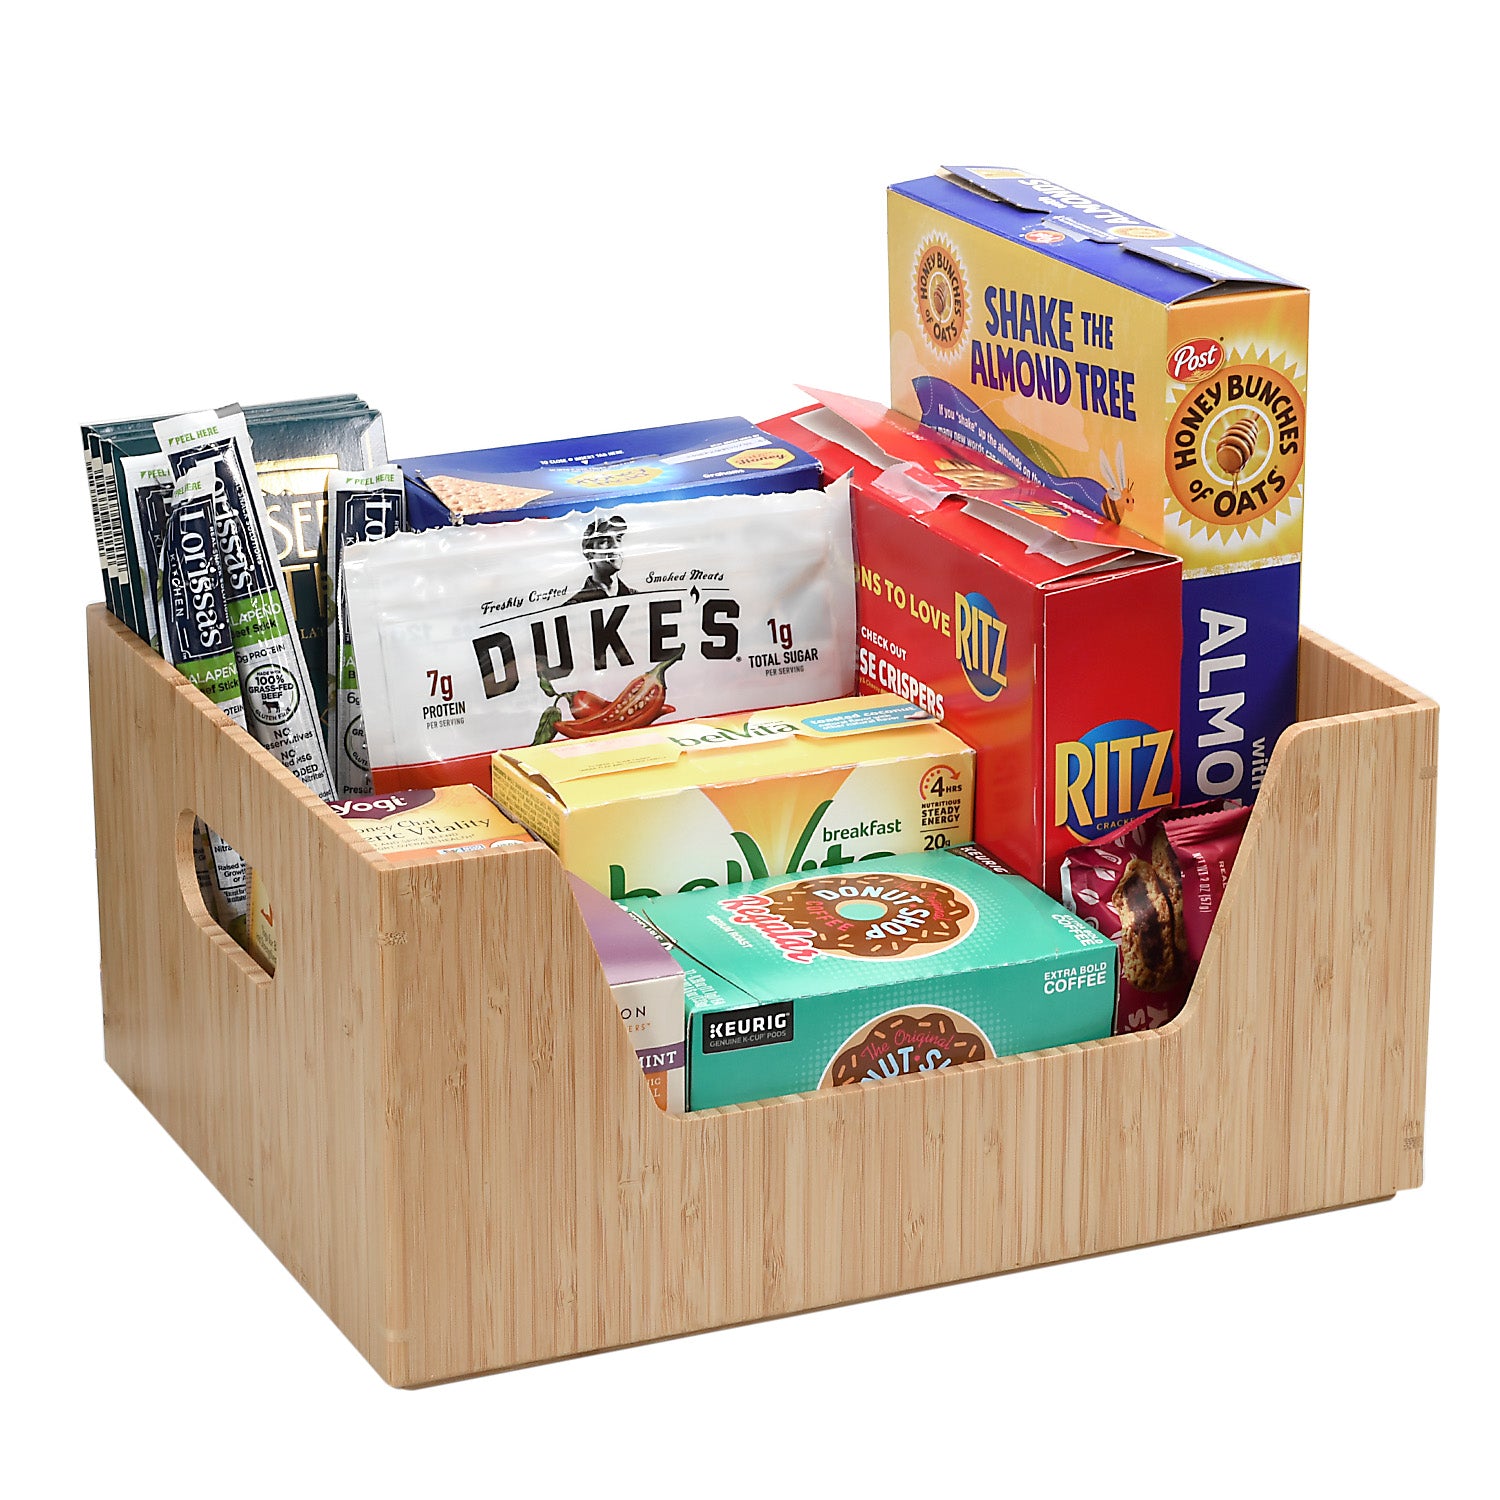 Bamboo Large Open Front Storage Box, 14 x 11 x 6.5